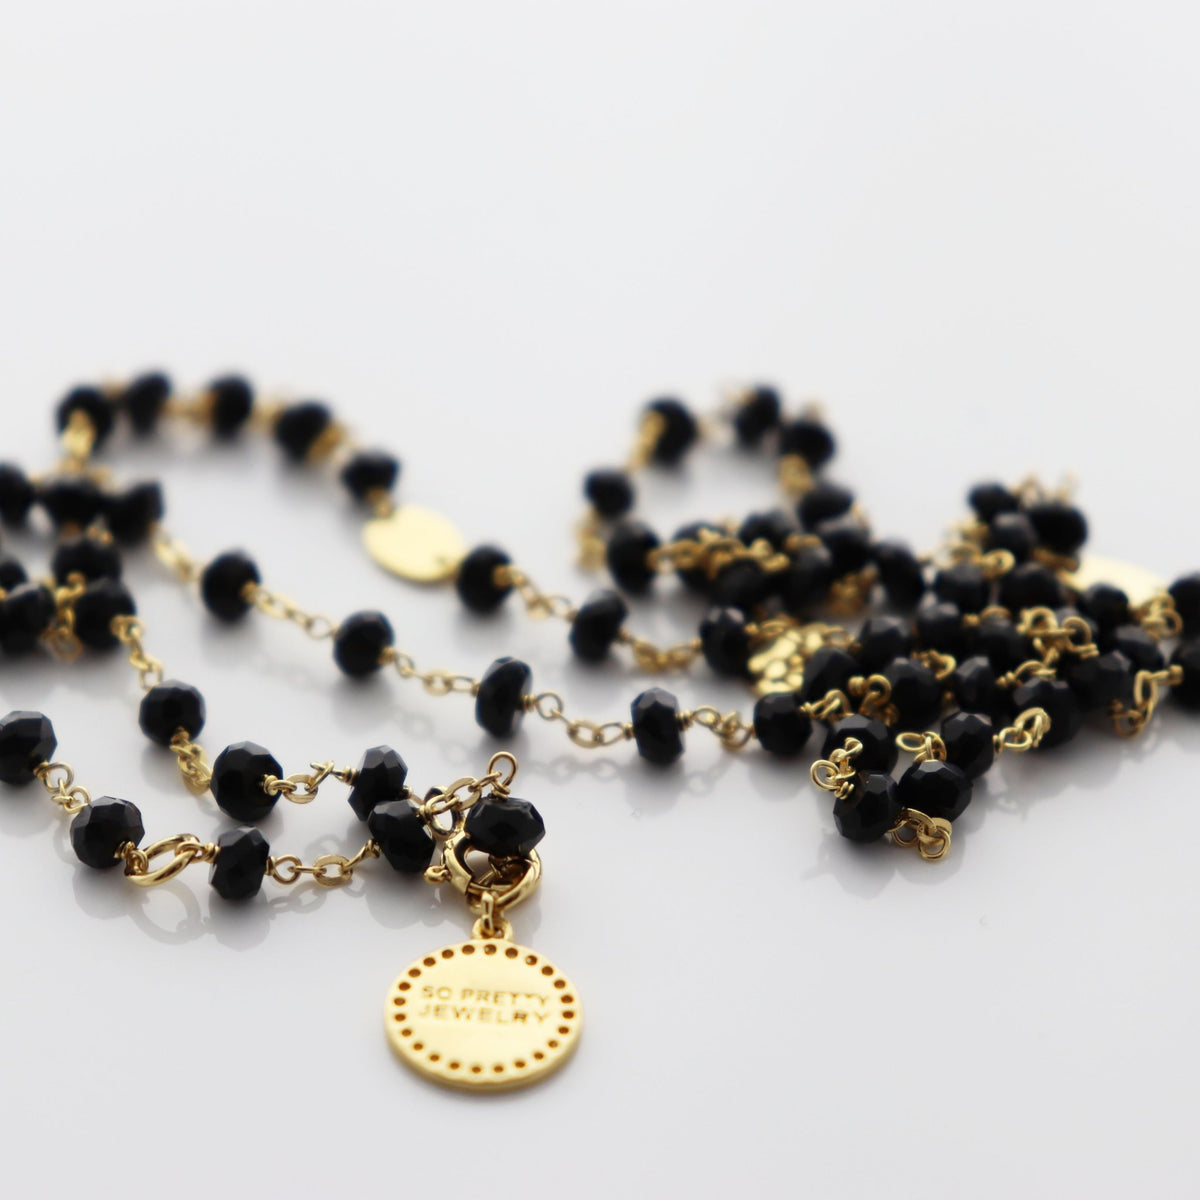 ICONIC SHORT BEADED NECKLACE - BLACK ONYX &amp; GOLD 16-20&quot; - SO PRETTY CARA COTTER